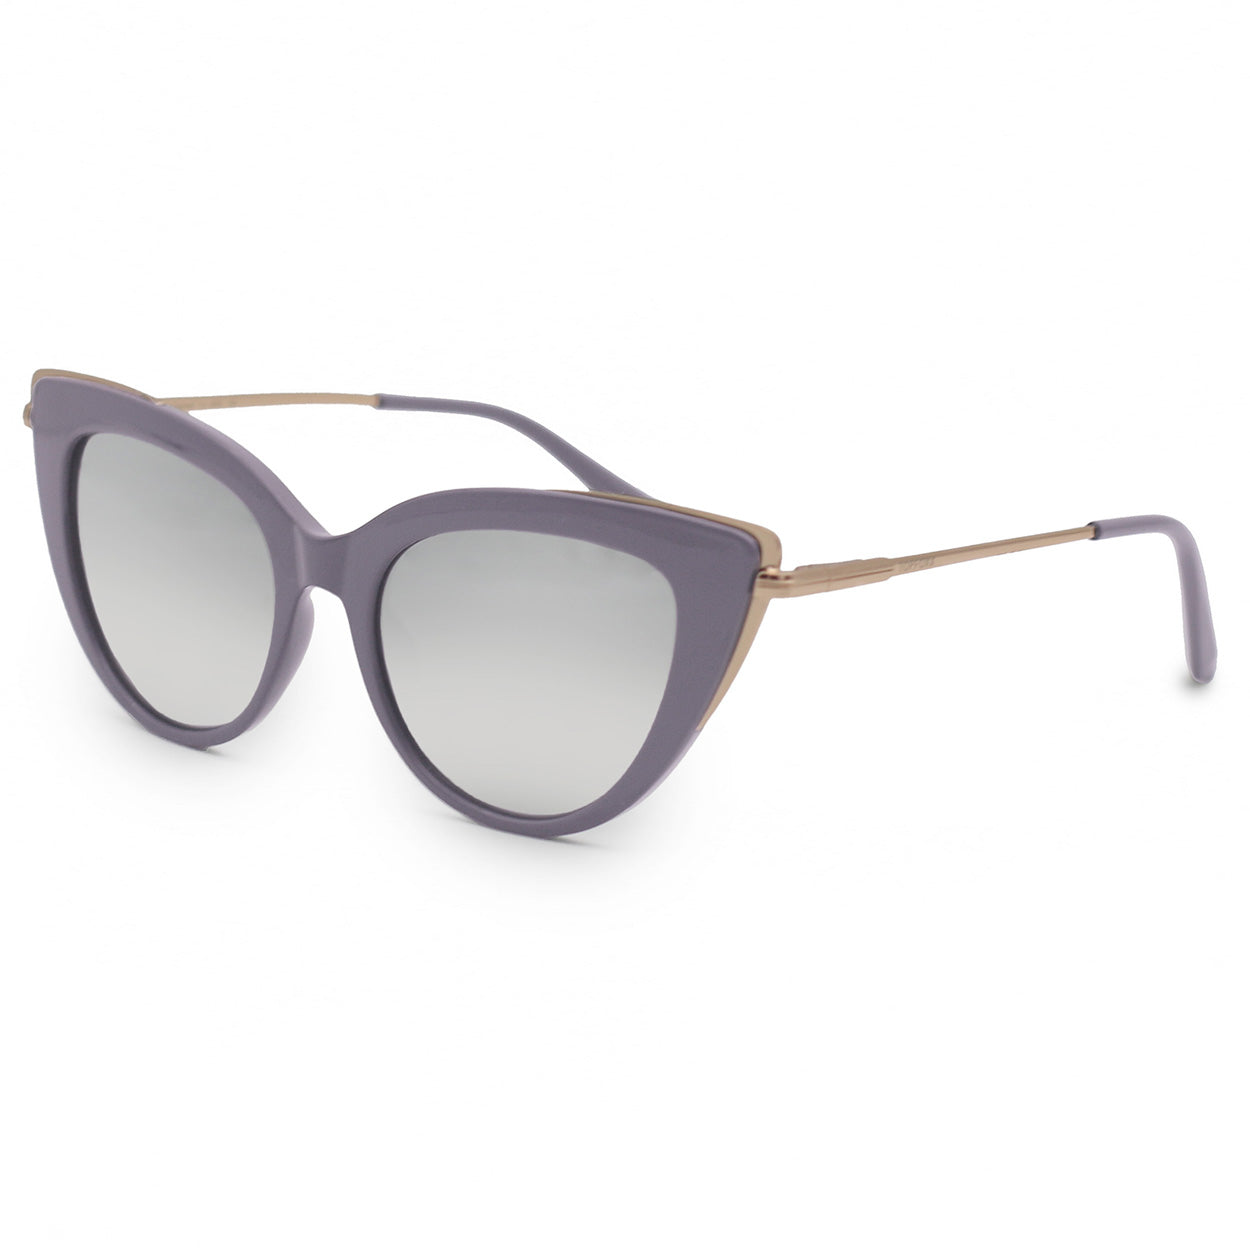 Side view of white background picture of oversize lavander glossy cateye sunglasses with metal detailing